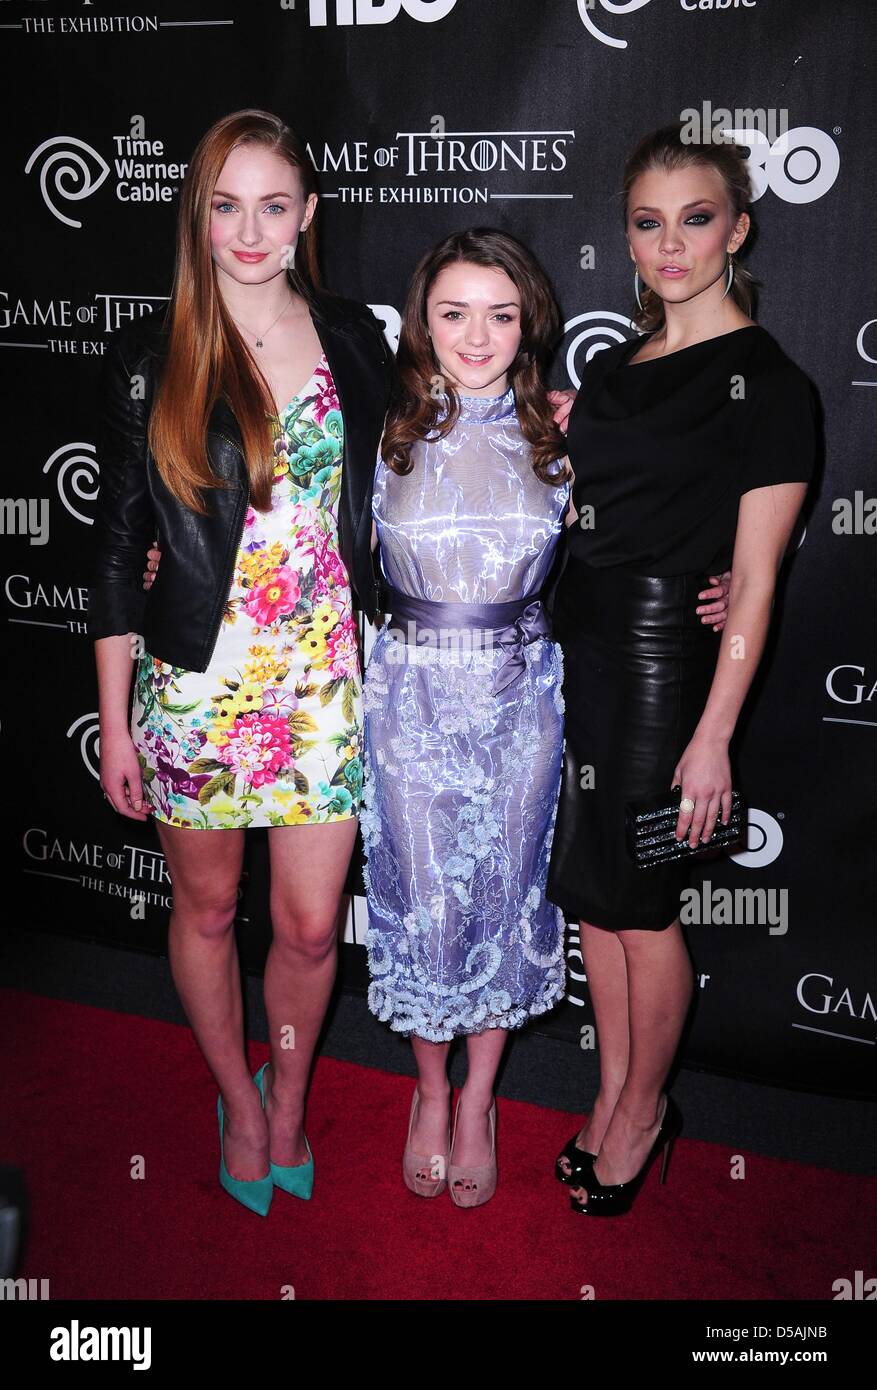 New York, USA. 27th March 2013. Sophie Turner, Maisie Williams, Natalie Dormer at arrivals for GAME OF THRONES: The Exhibition Opening Night, 3 West 57th Street, New York, NY March 27, 2013. Photo By: Gregorio T. Binuya/Everett Collection/Alamy Live News Stock Photo